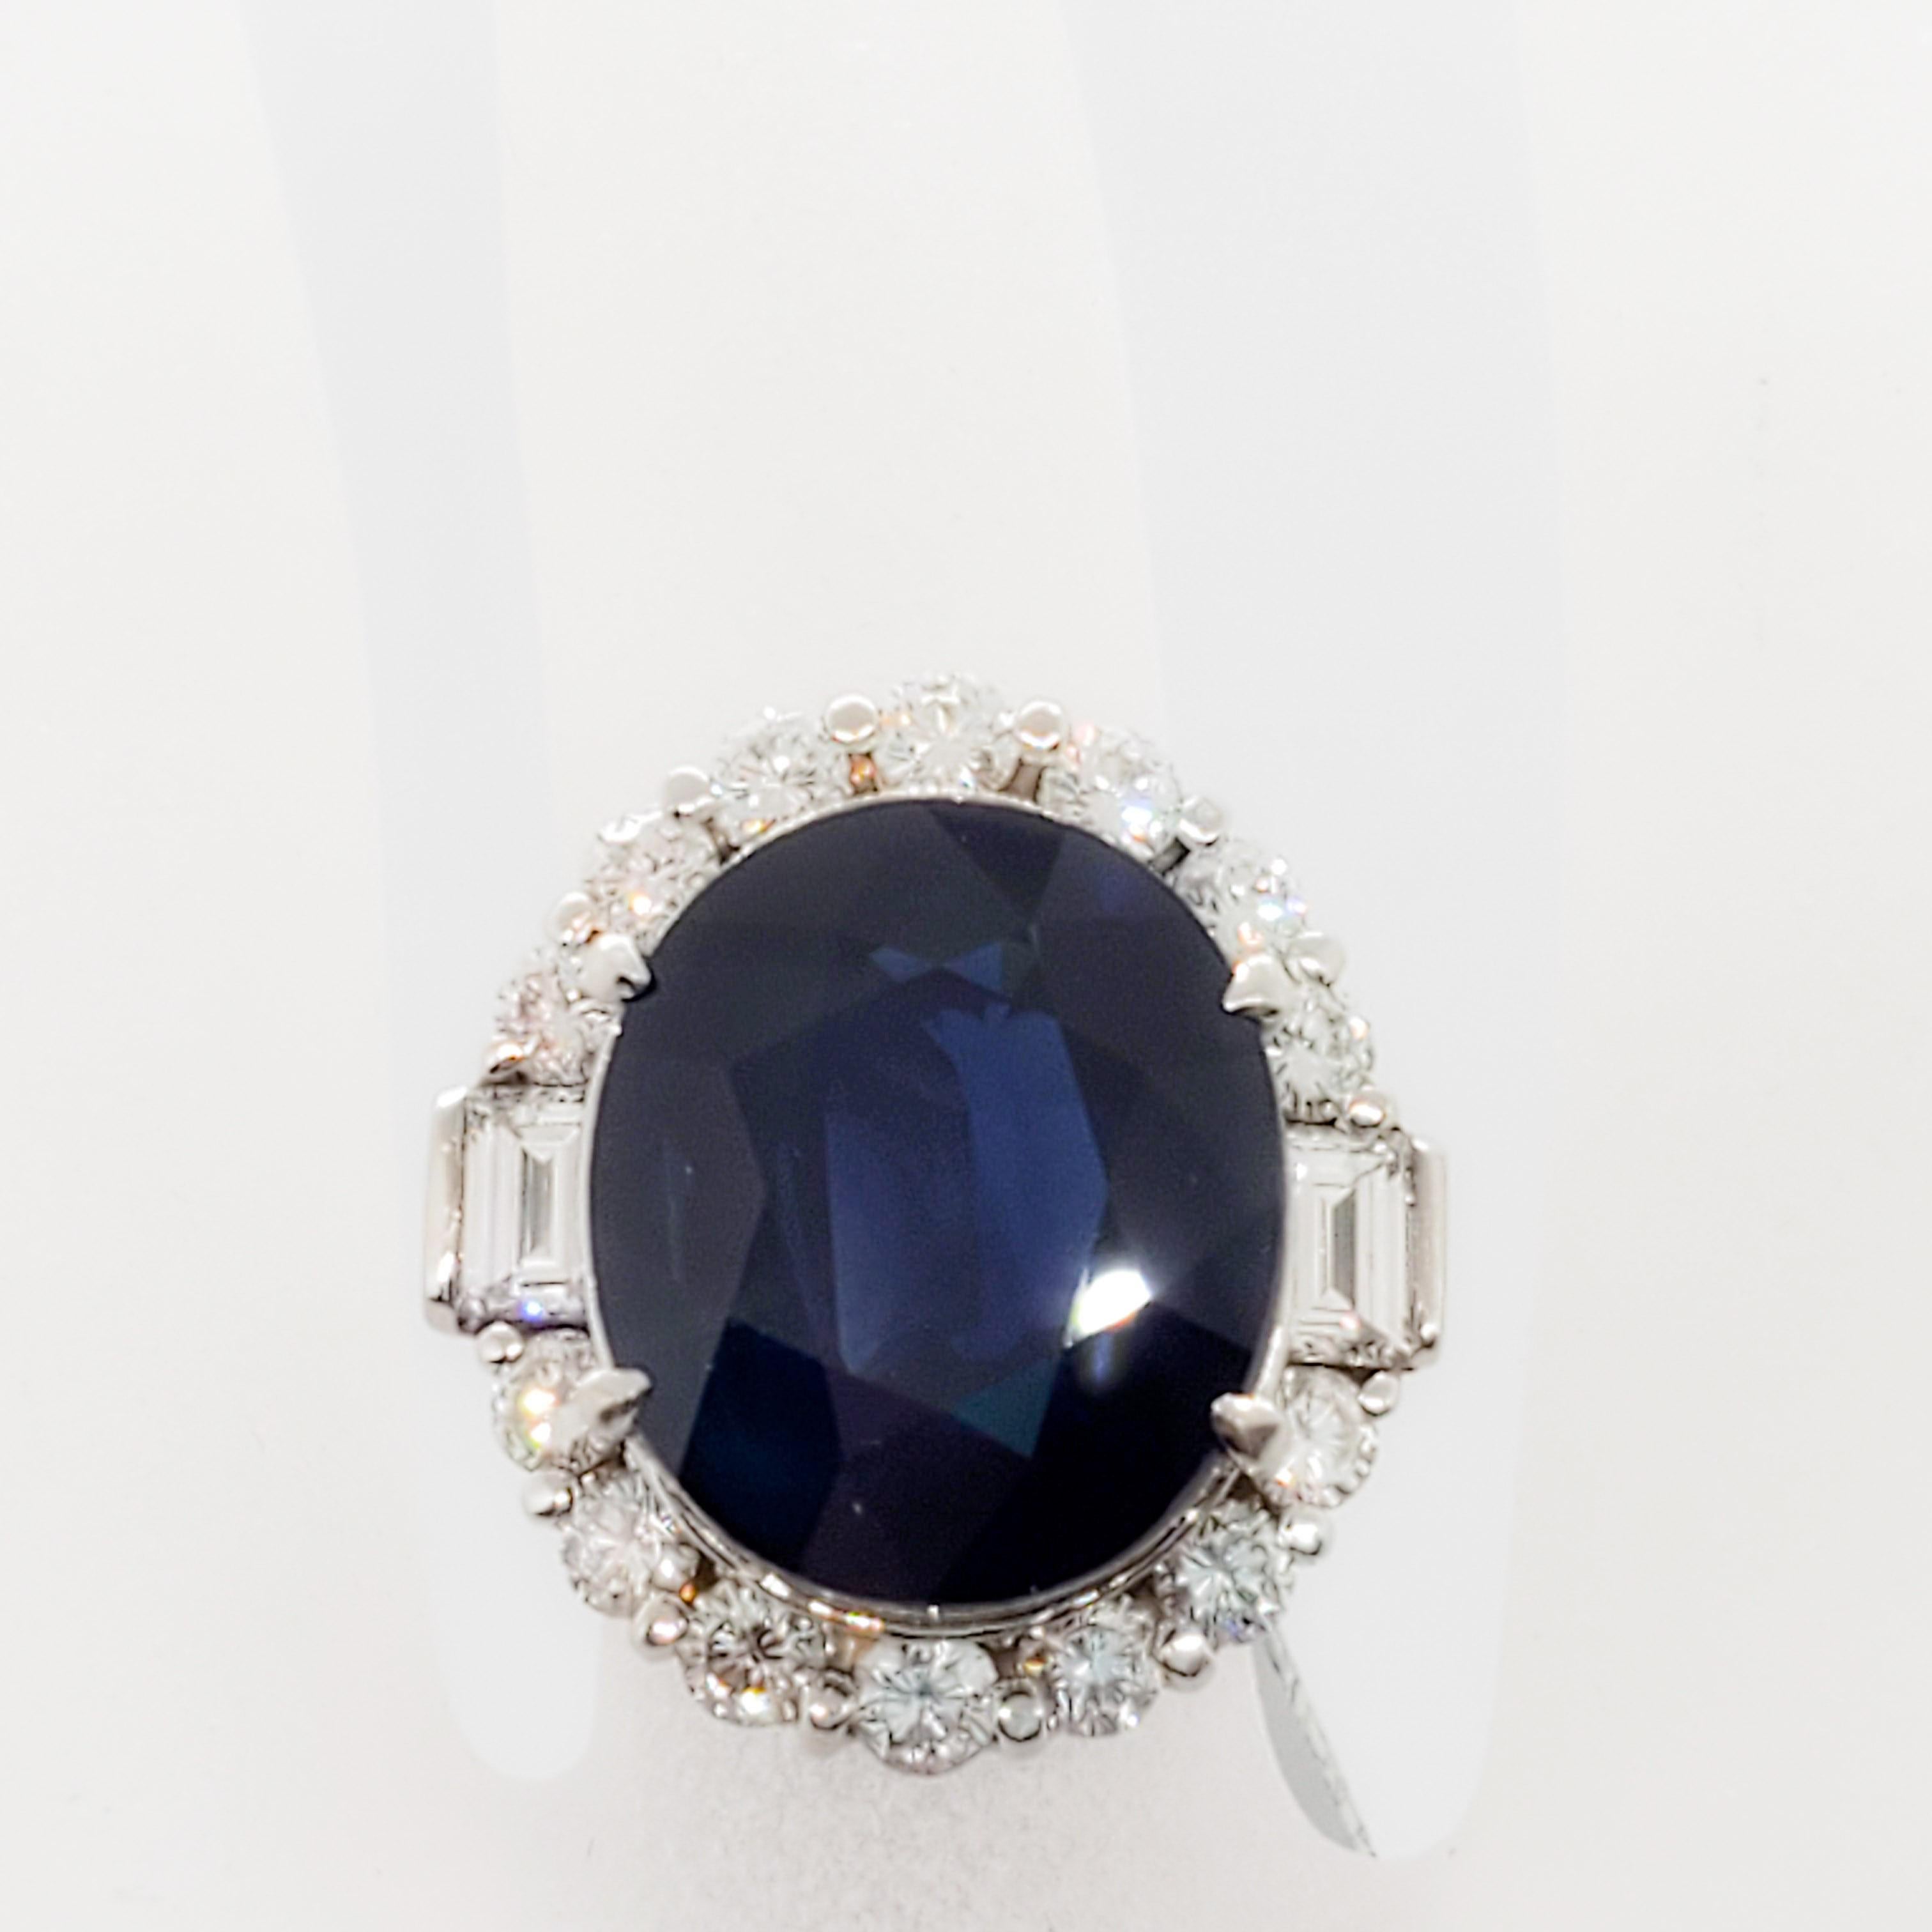 Beyond stunning blue sapphire oval weighing 15.47 cts with a deep bright blue crystal. Surrounded by 1.91 cts of good quality diamonds. Handmade platinum moutning in size 6.25. This ring is a jewelry lover's dream!